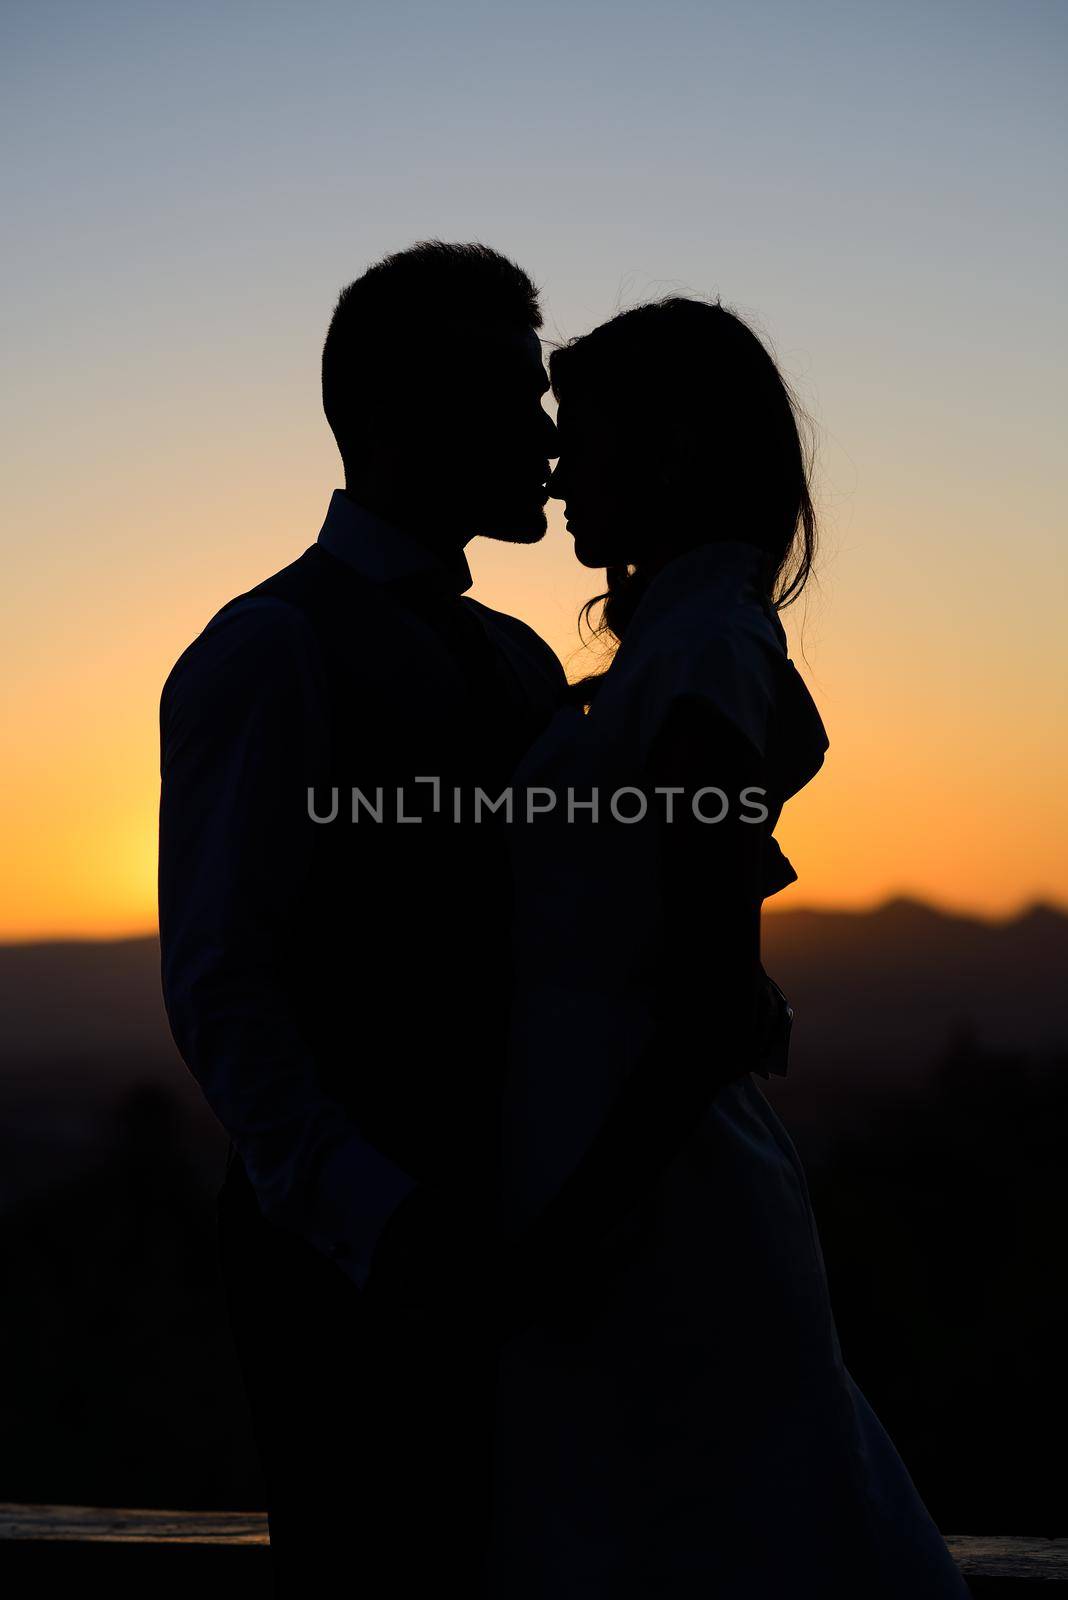 Silhouette of a young bride and groom on Sunset background